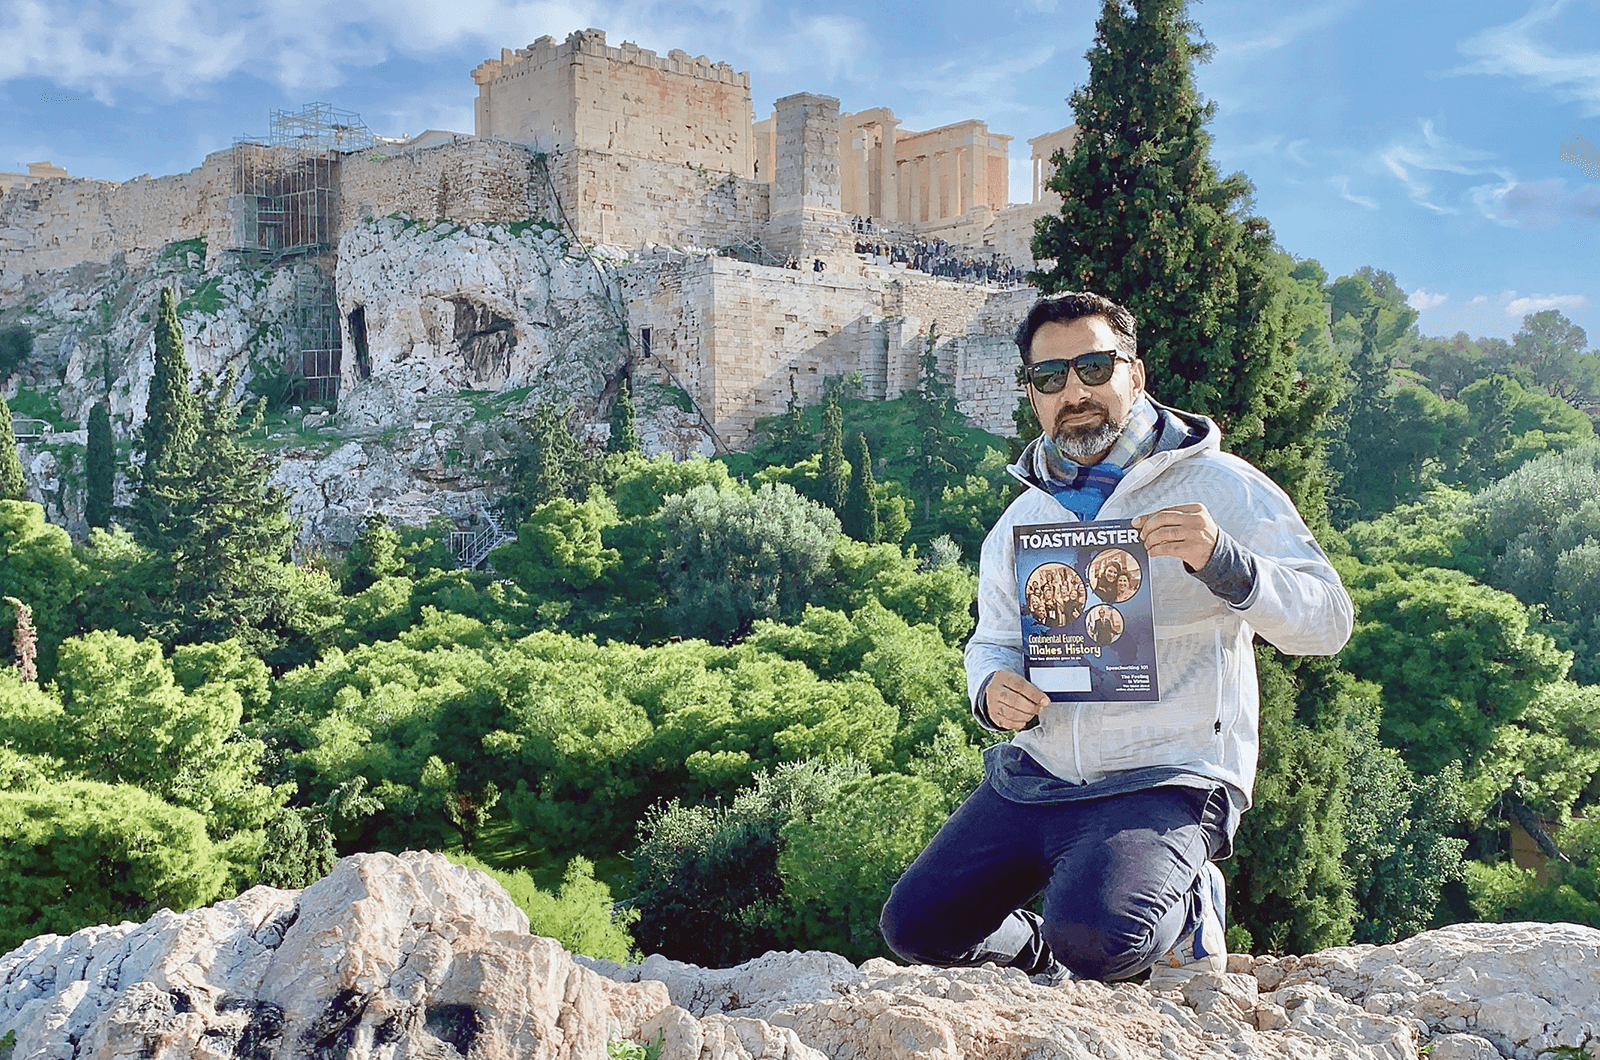 Amjad Ali of Dubai, United Arab Emirates, sits below the Acropolis of Athens, Greece, an ancient citadel perched above the city.